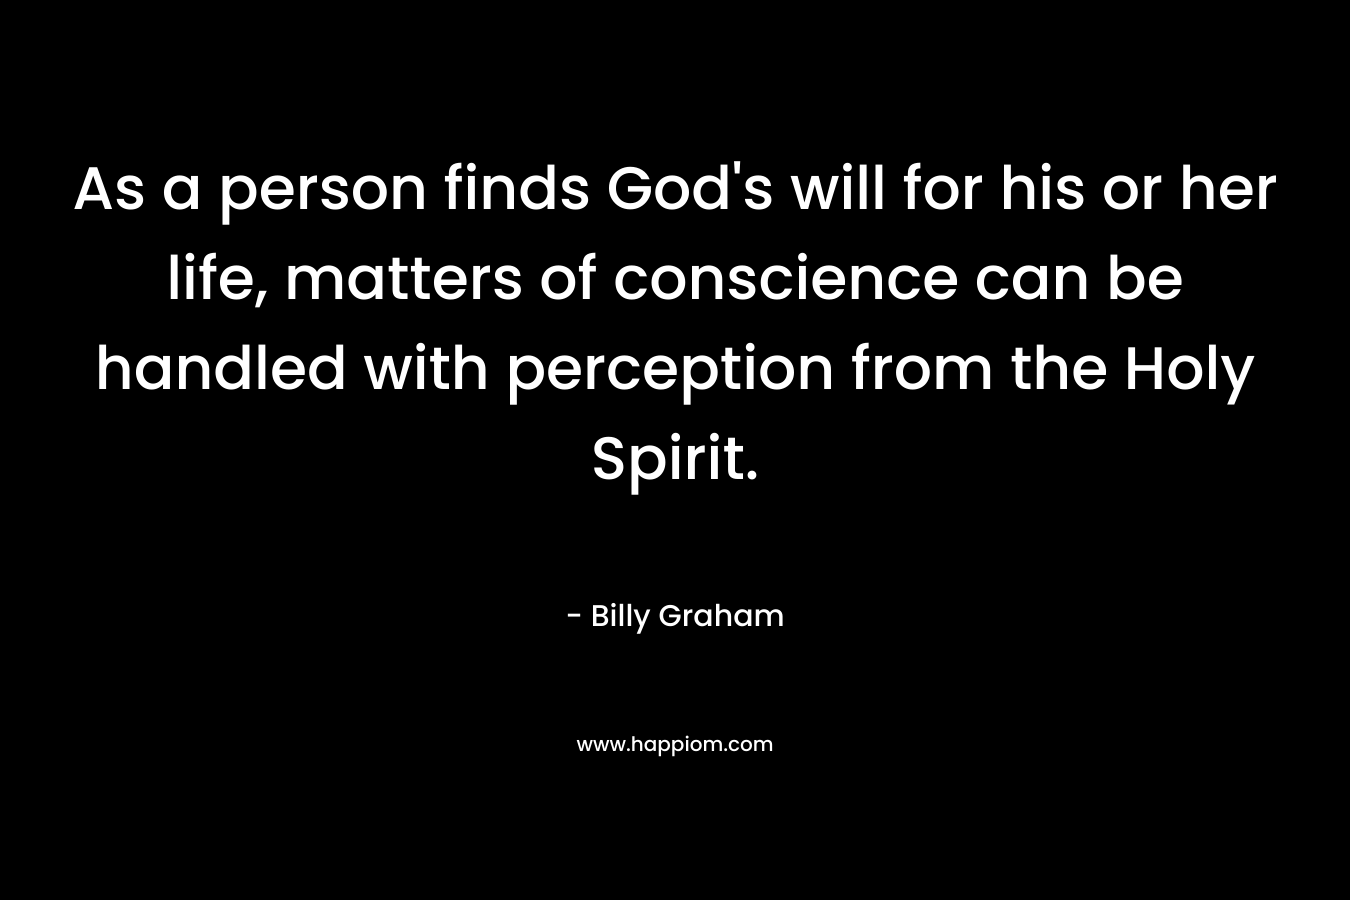 As a person finds God’s will for his or her life, matters of conscience can be handled with perception from the Holy Spirit. – Billy Graham